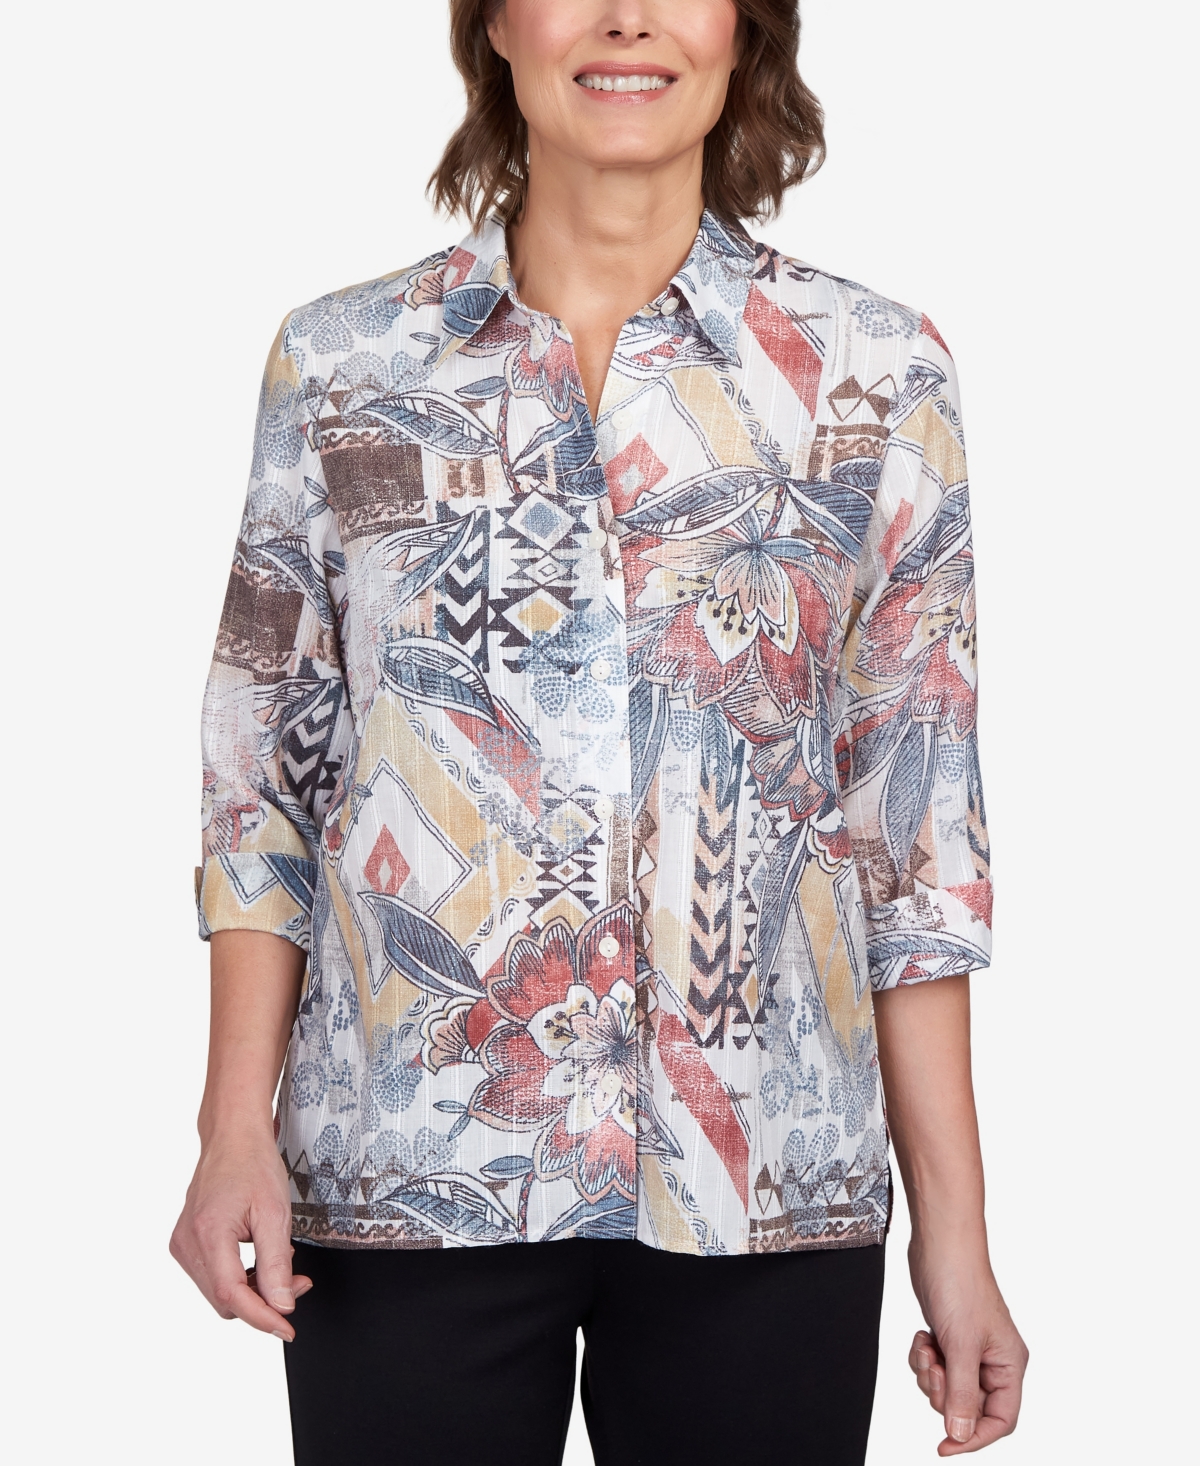 ALFRED DUNNER WOMEN'S CLASSICS ECLECTIC FLORAL BUTTON DOWN TOP